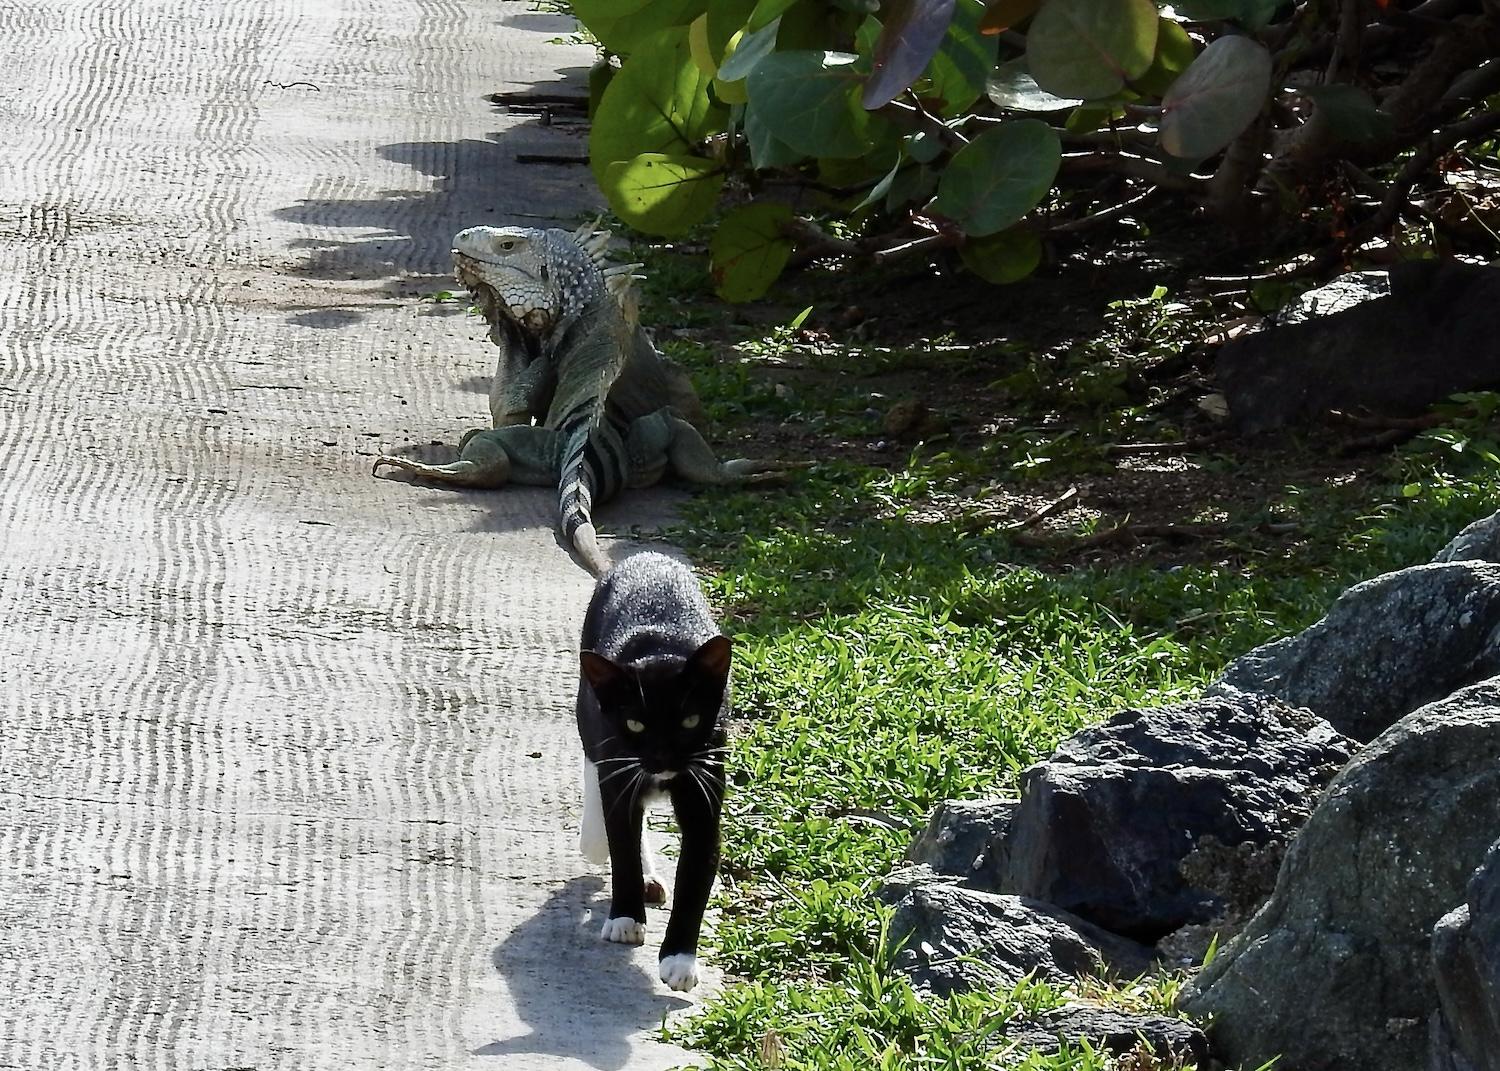 Green iguanas and feral cats are invasive species that co-exist in San Juan National Historic Site.